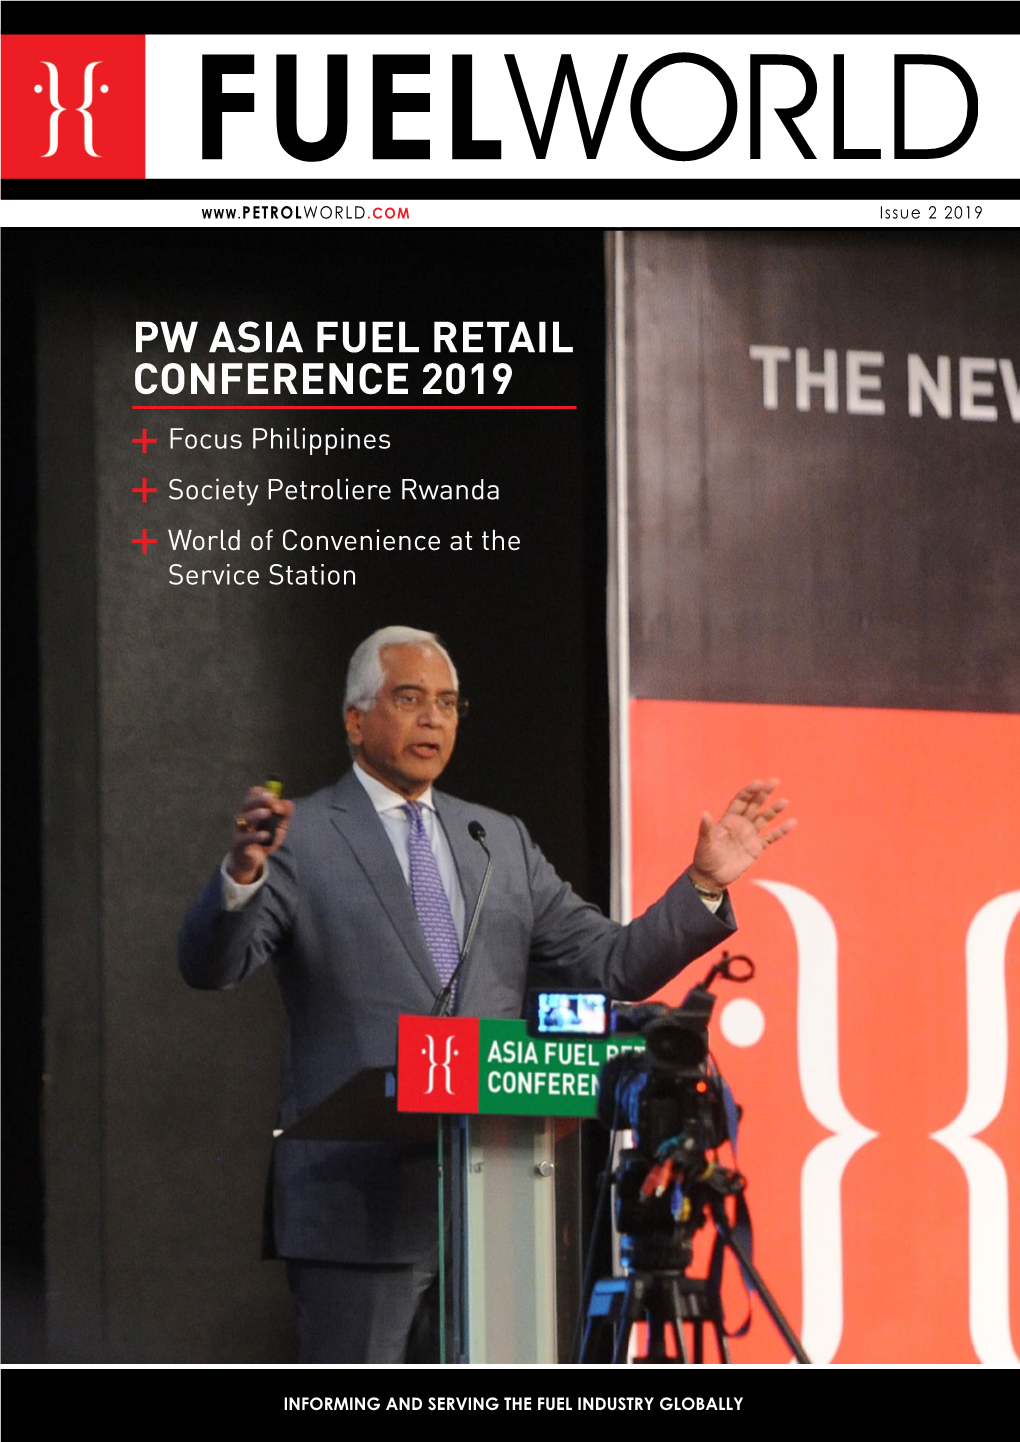 PW ASIA FUEL RETAIL CONFERENCE 2019 Focus Philippines Society Petroliere Rwanda World of Convenience at the Service Station